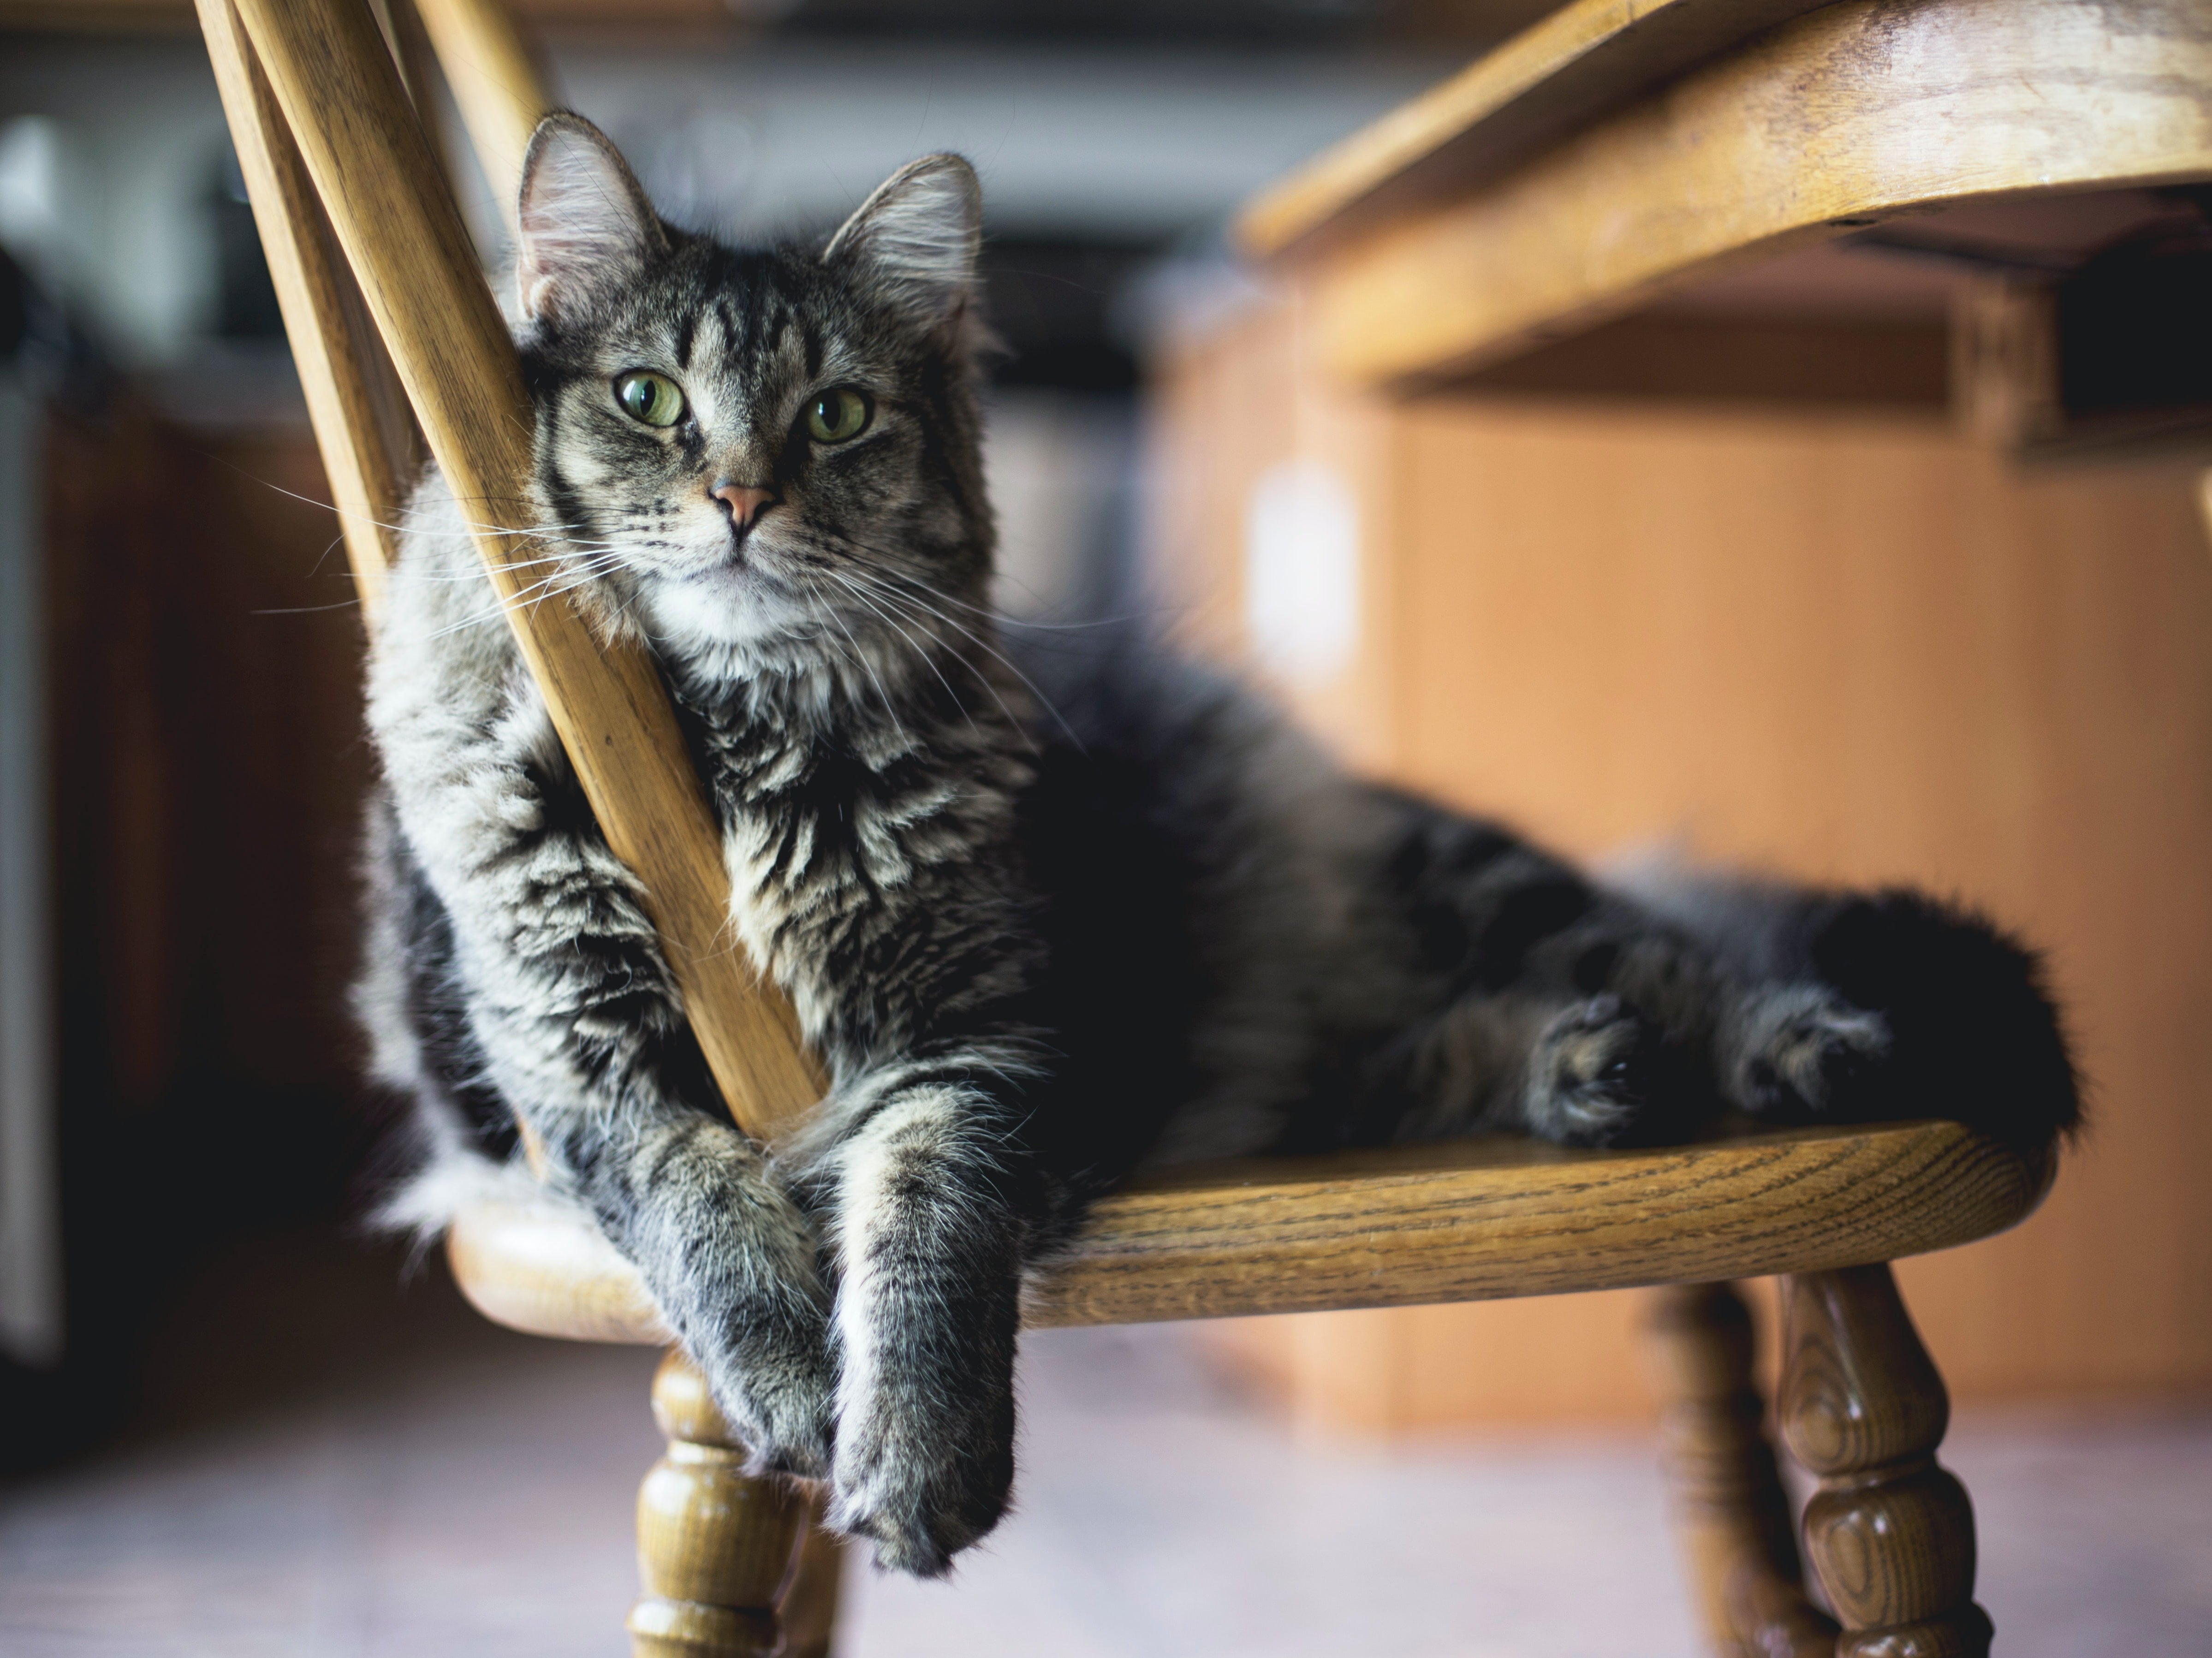 A cat sits on a chair